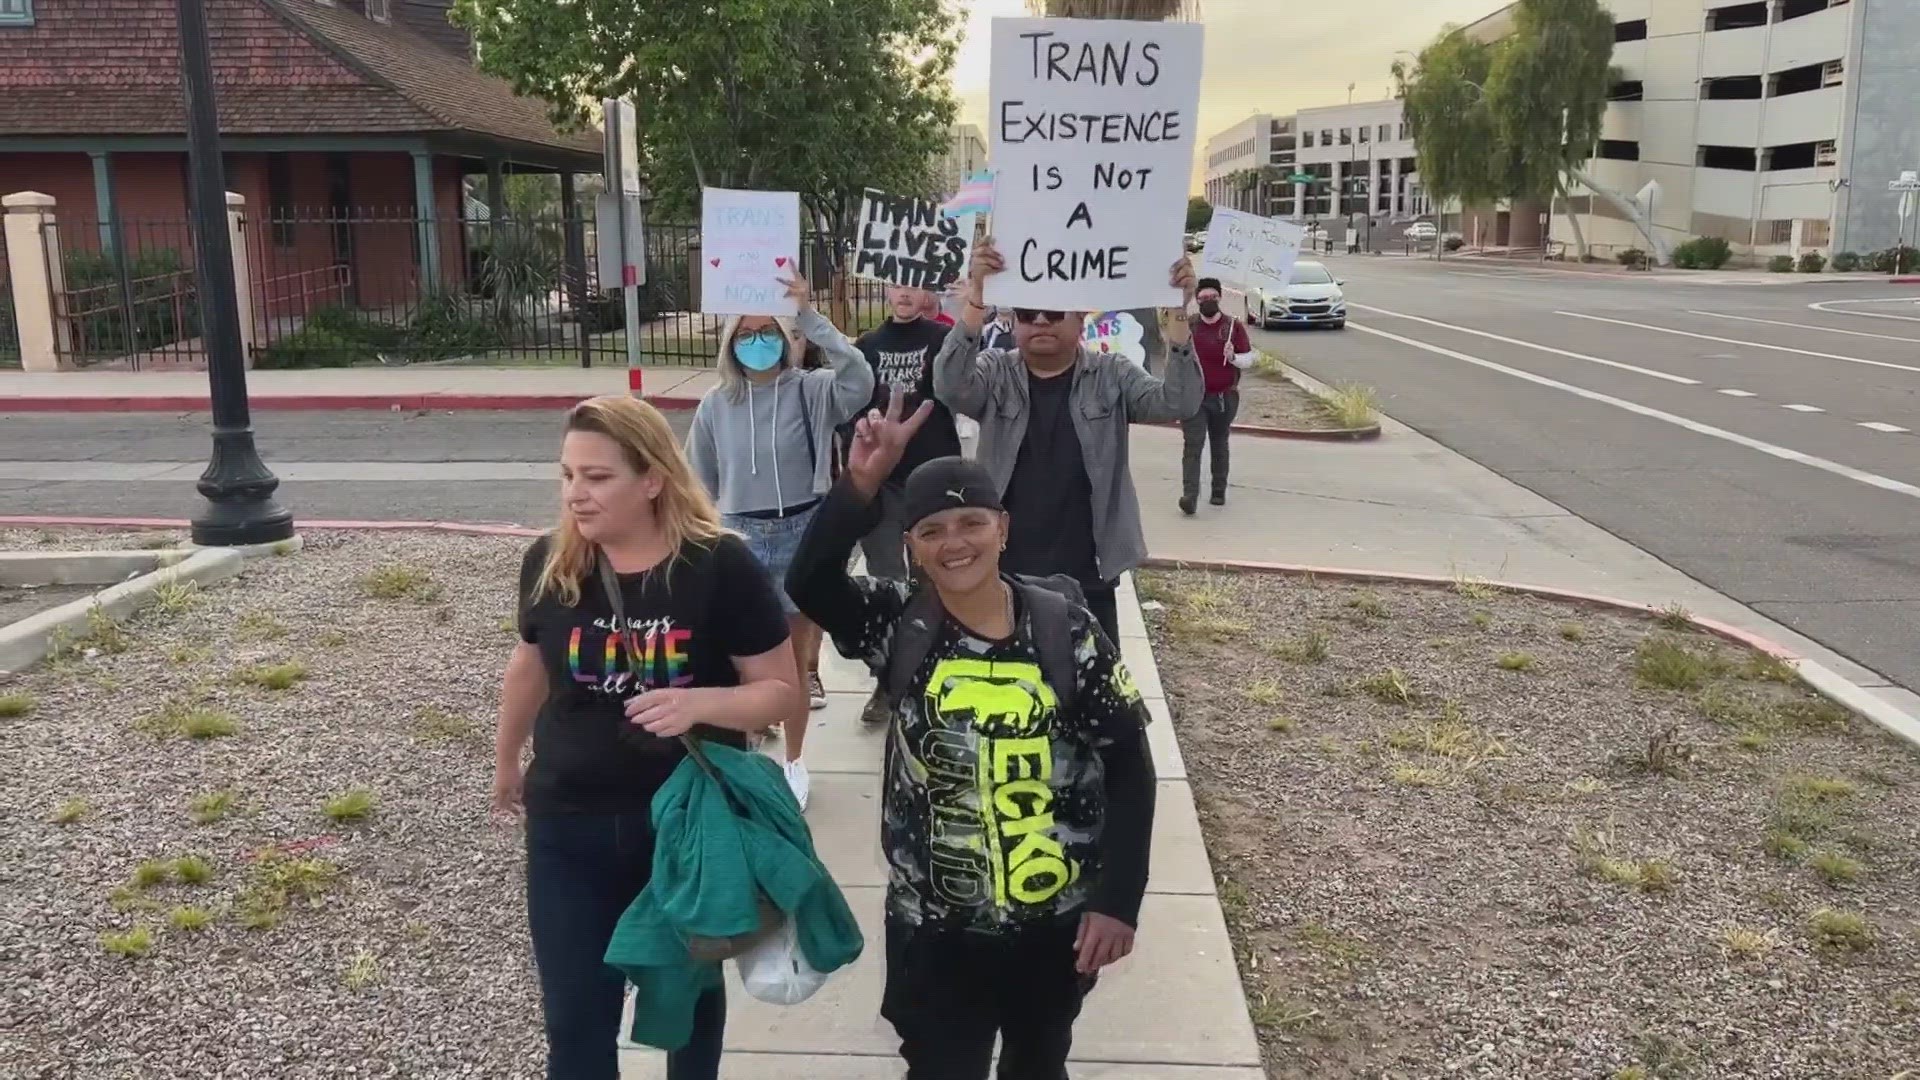 Arizona's rally was just one of many rallies nationwide raising awareness about the numerous bills targeting trans youth.